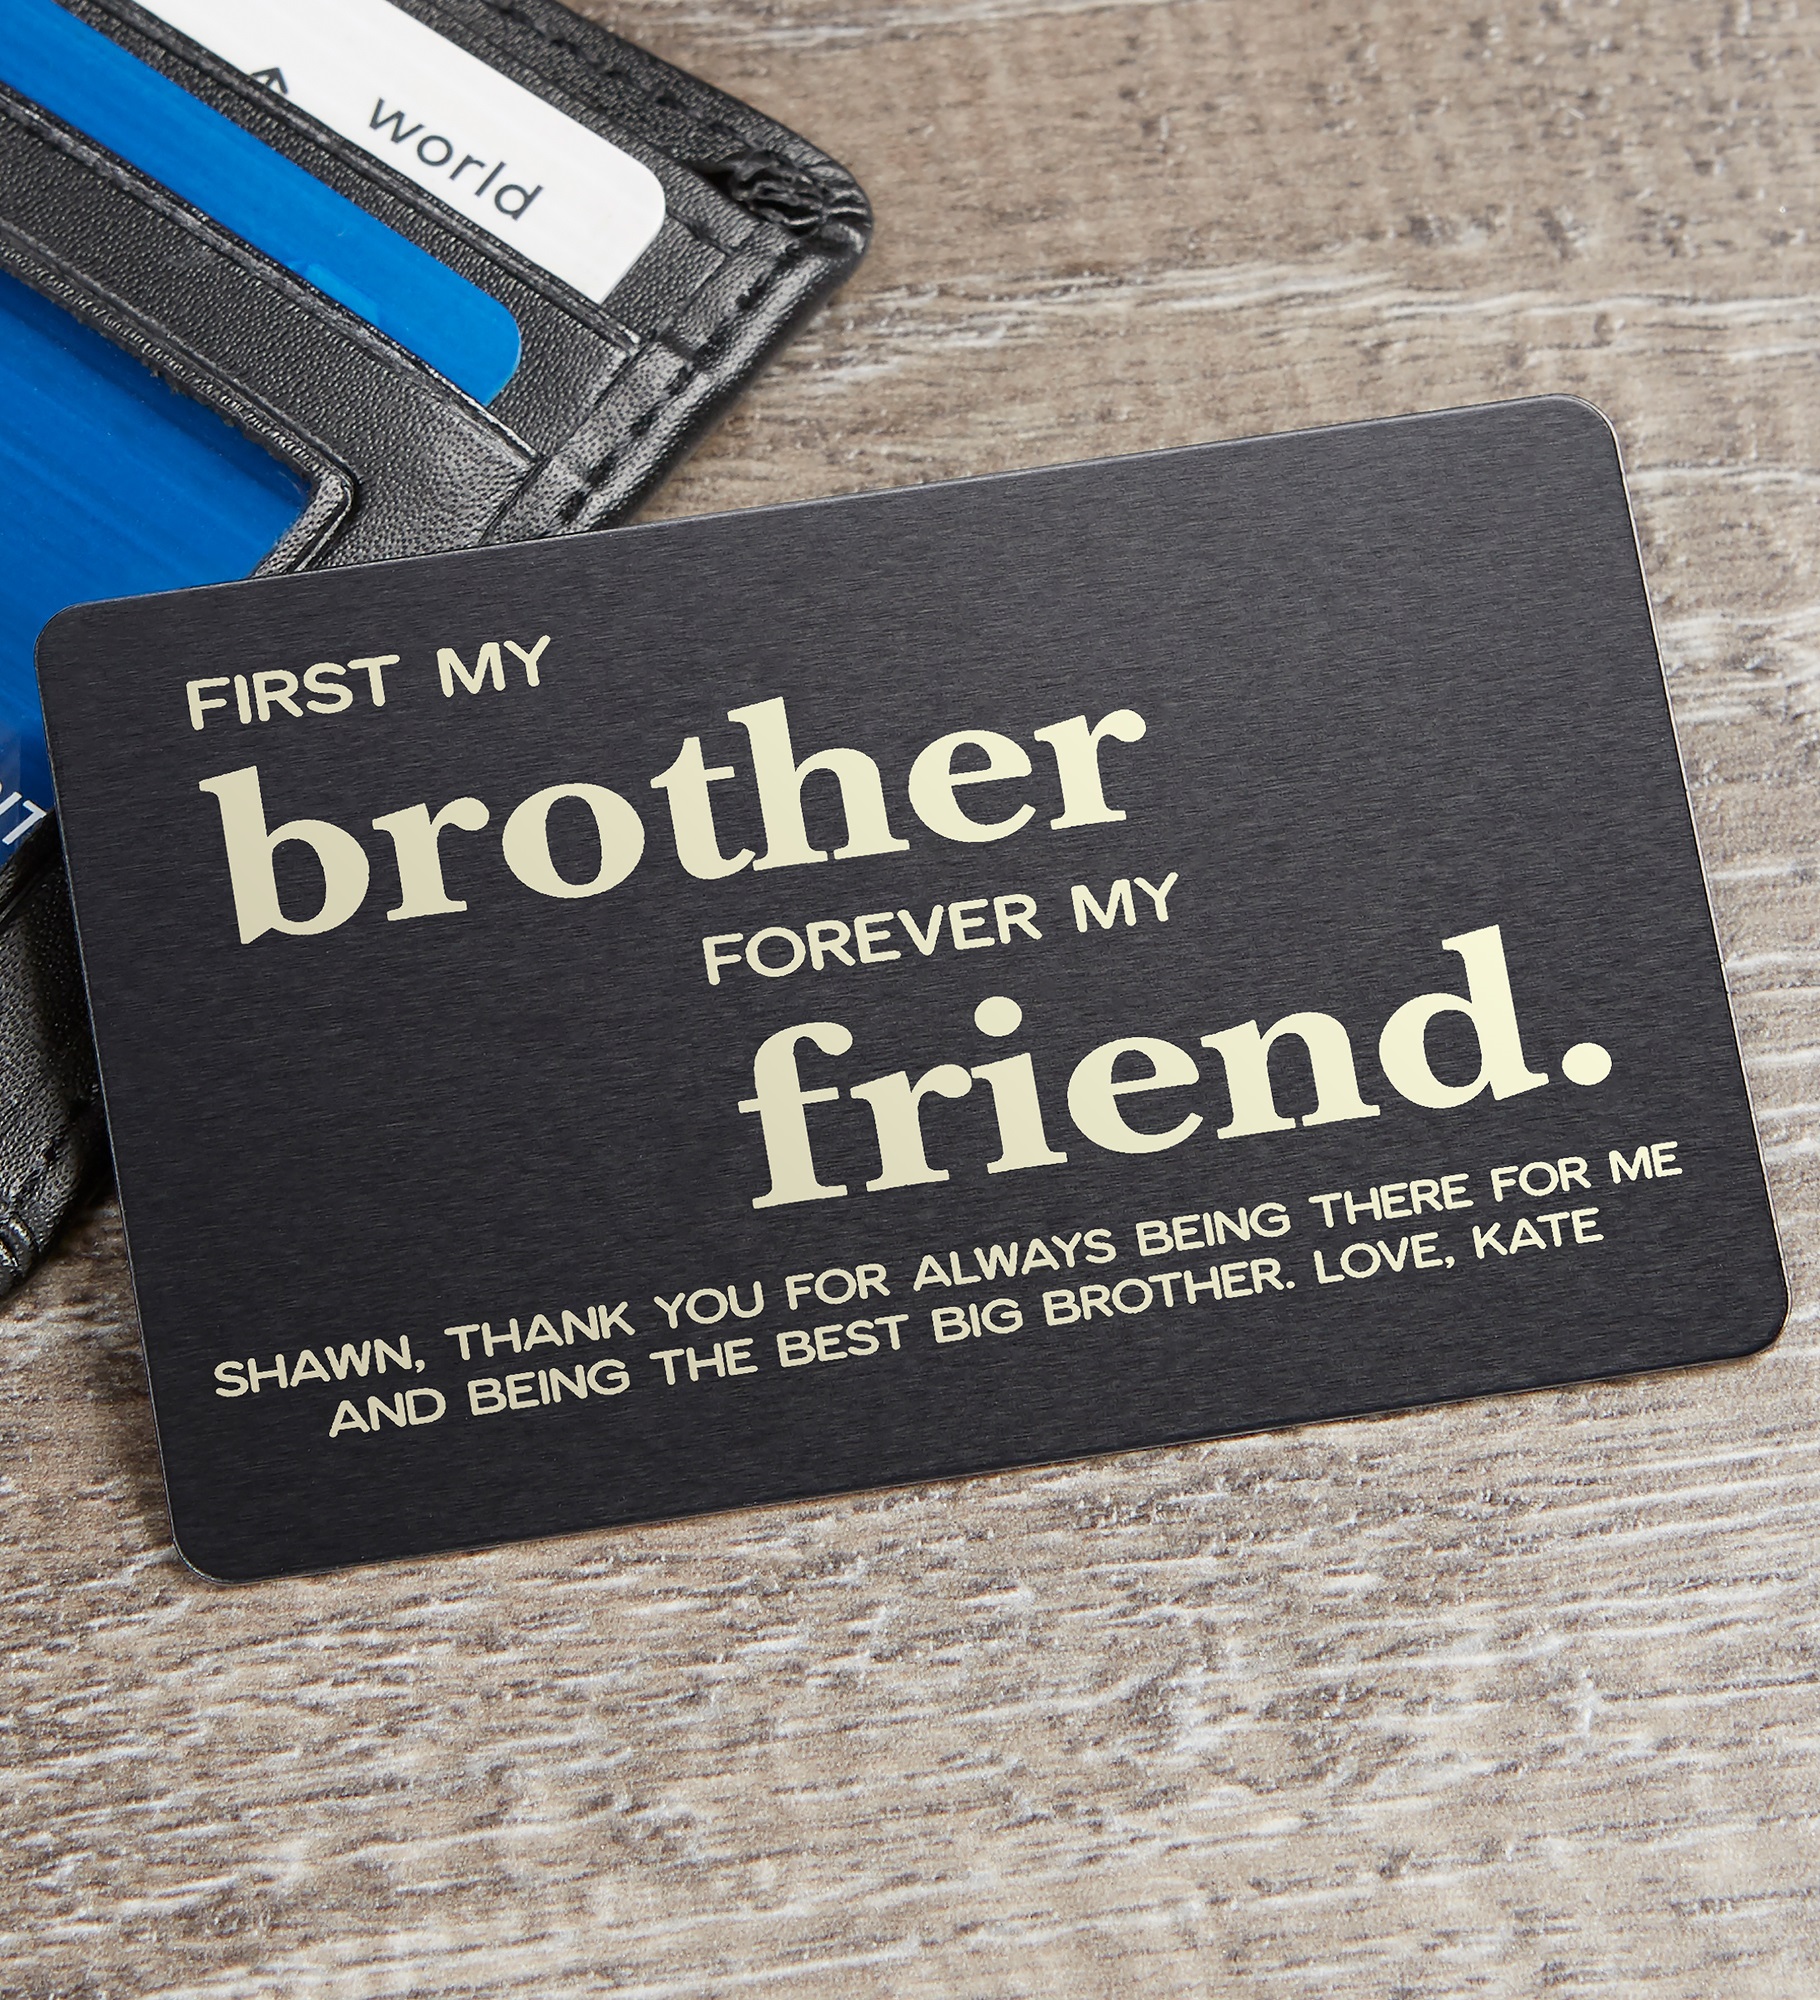 First My Brother Engraved Metal Wallet Card